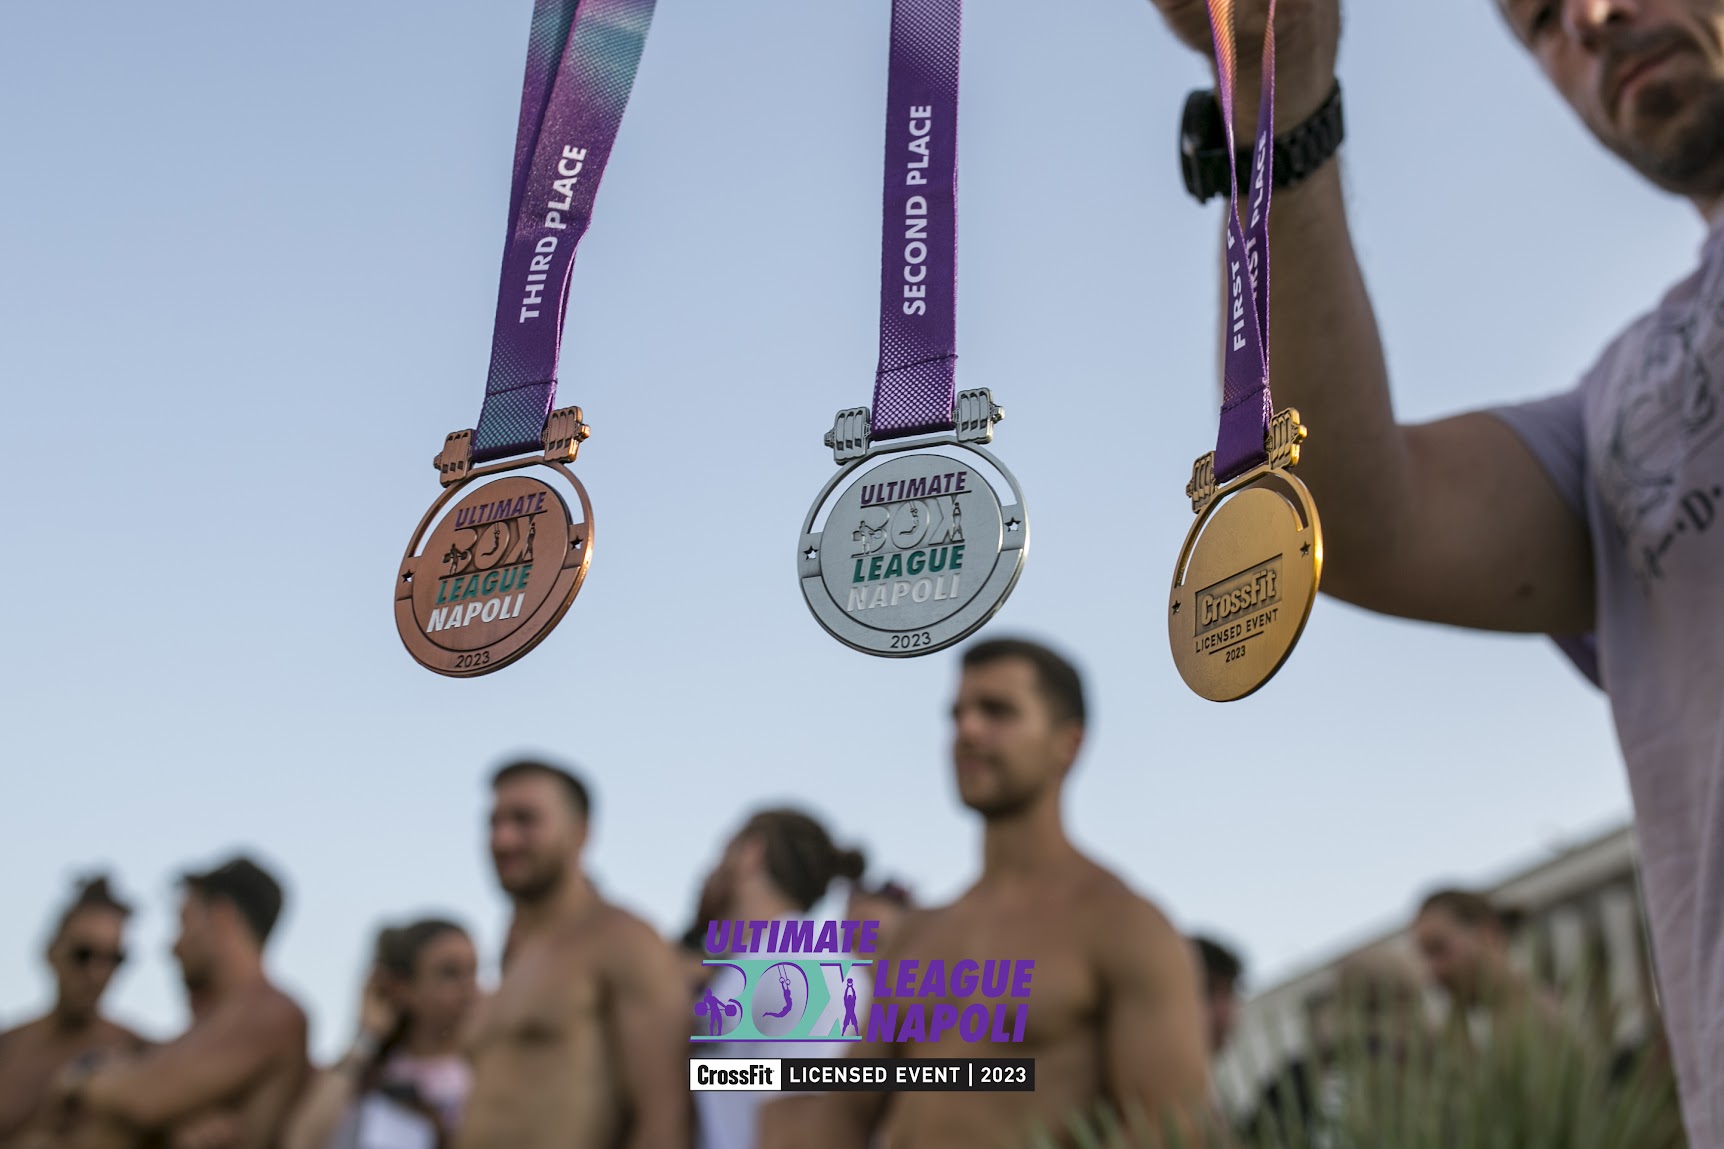 Medals of UBL | The Italian Championship 2023, the major Crossfit throwdown in Italy